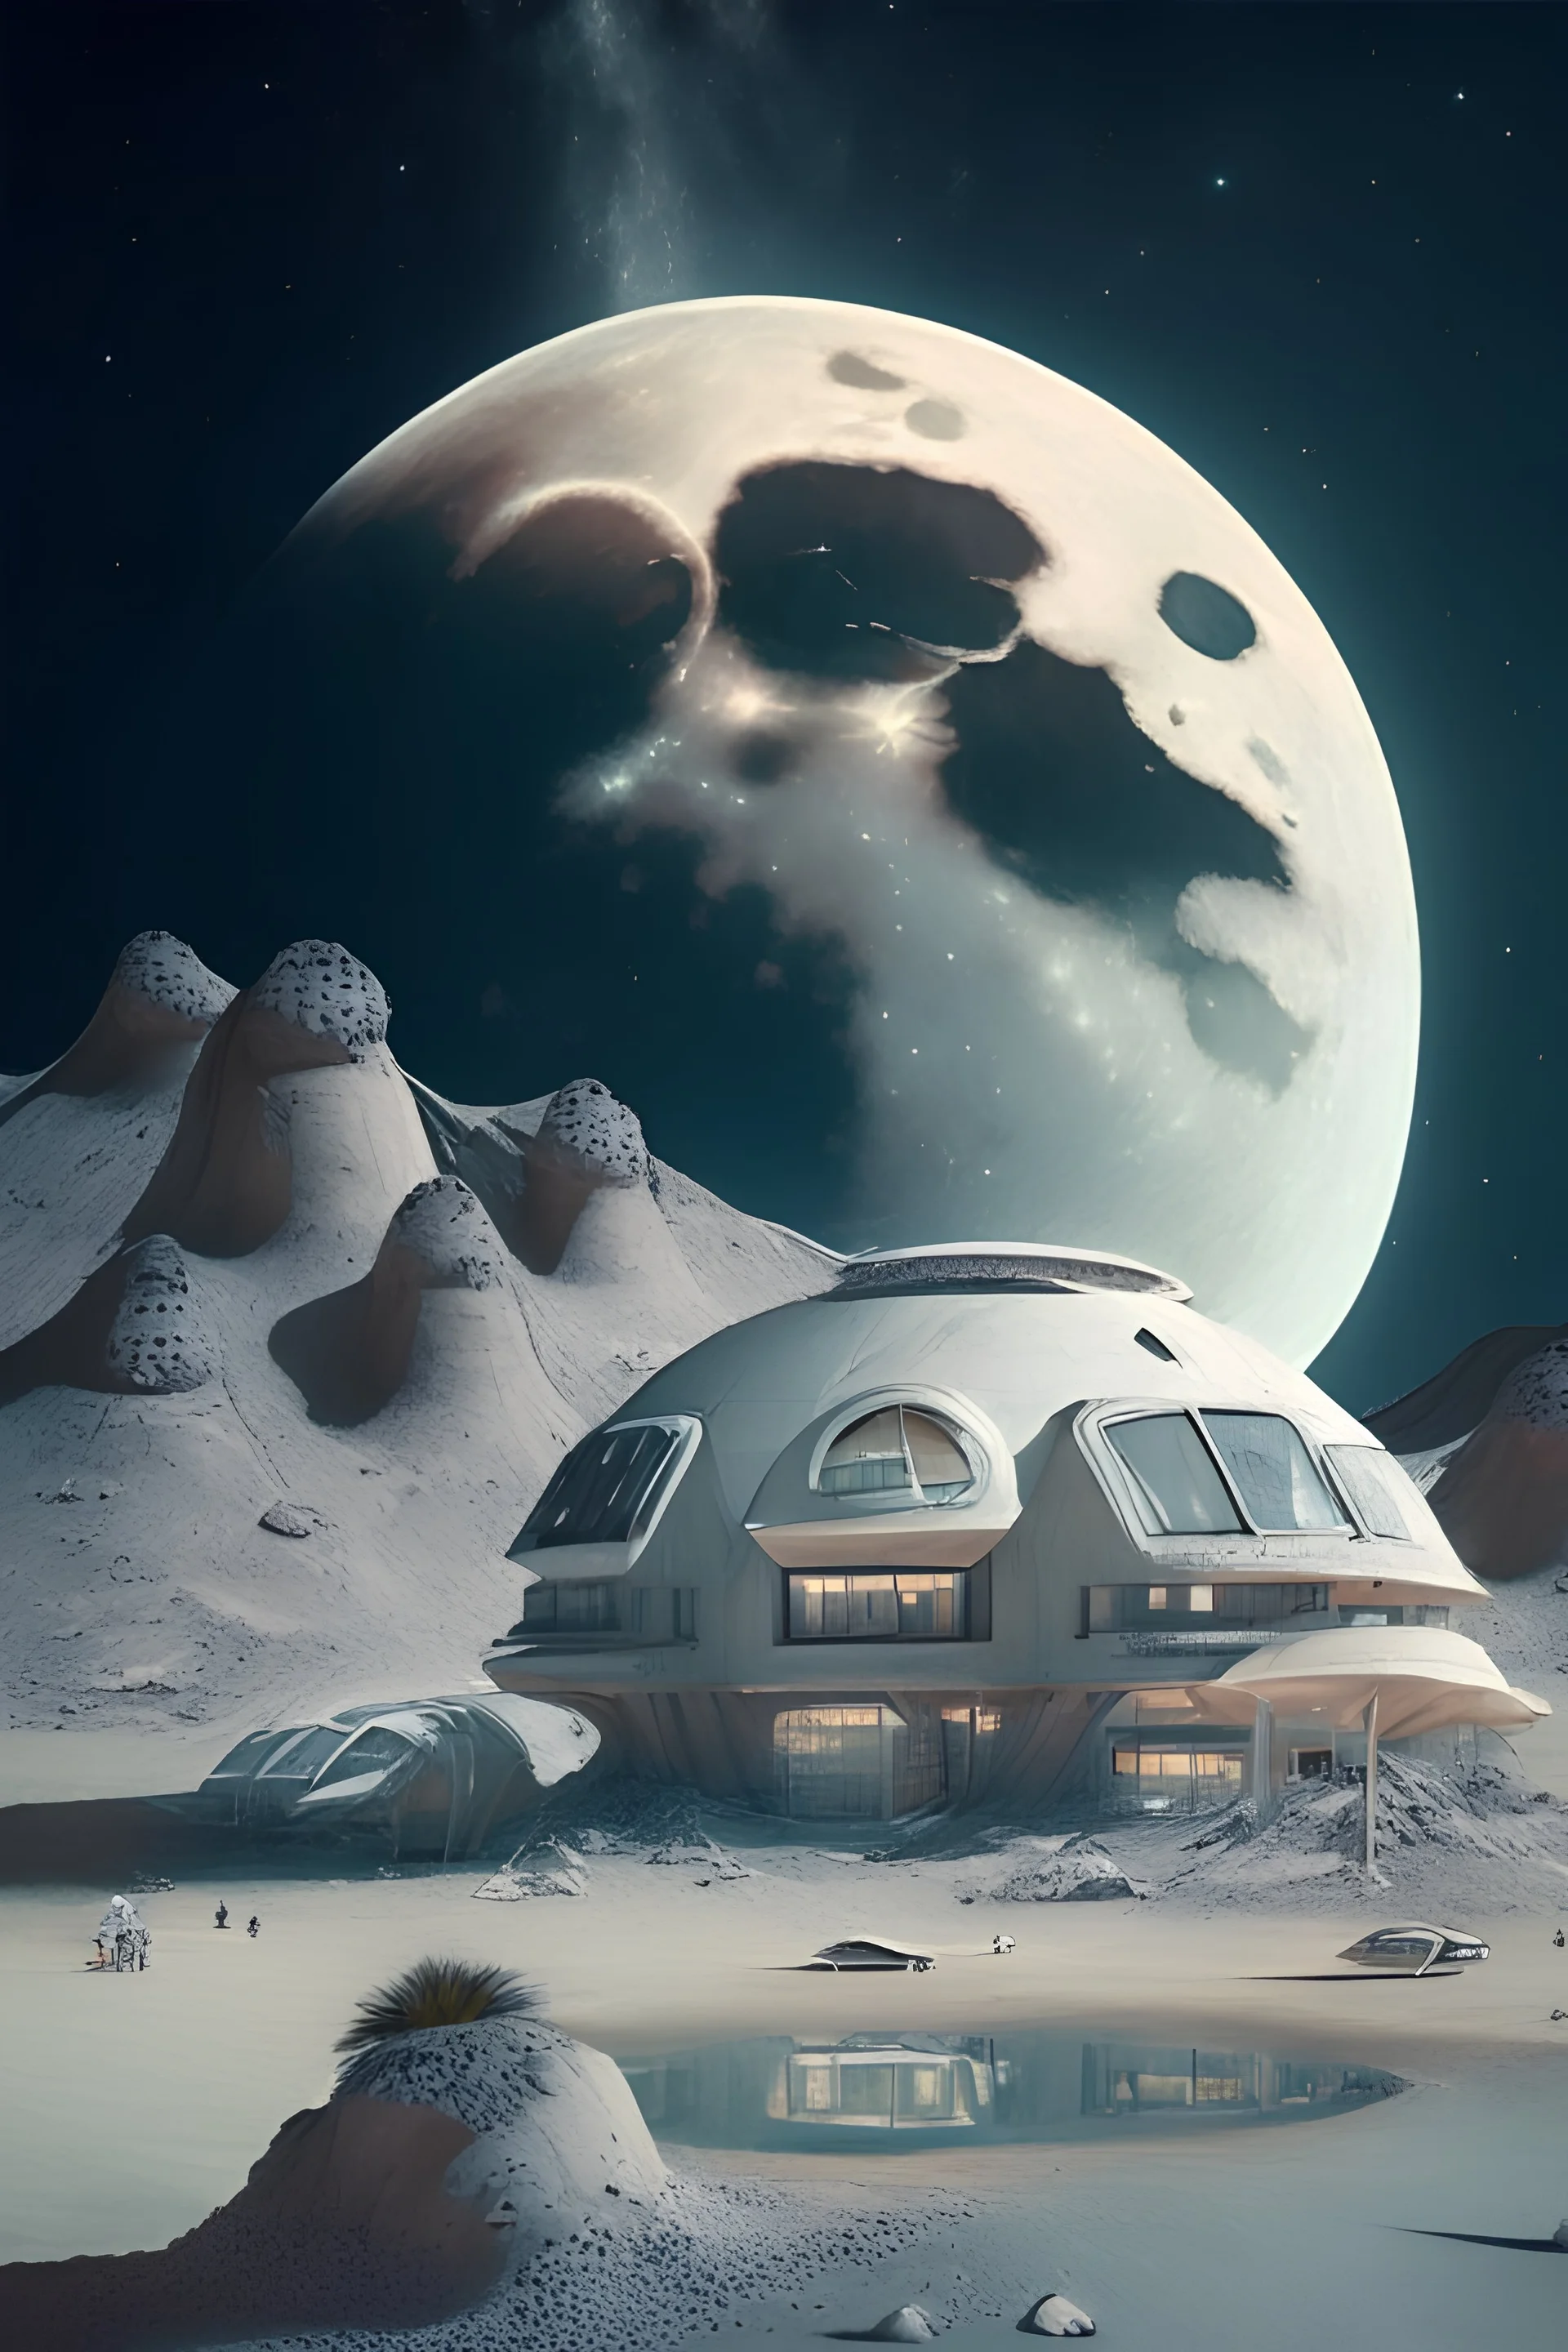 A resort on the moon